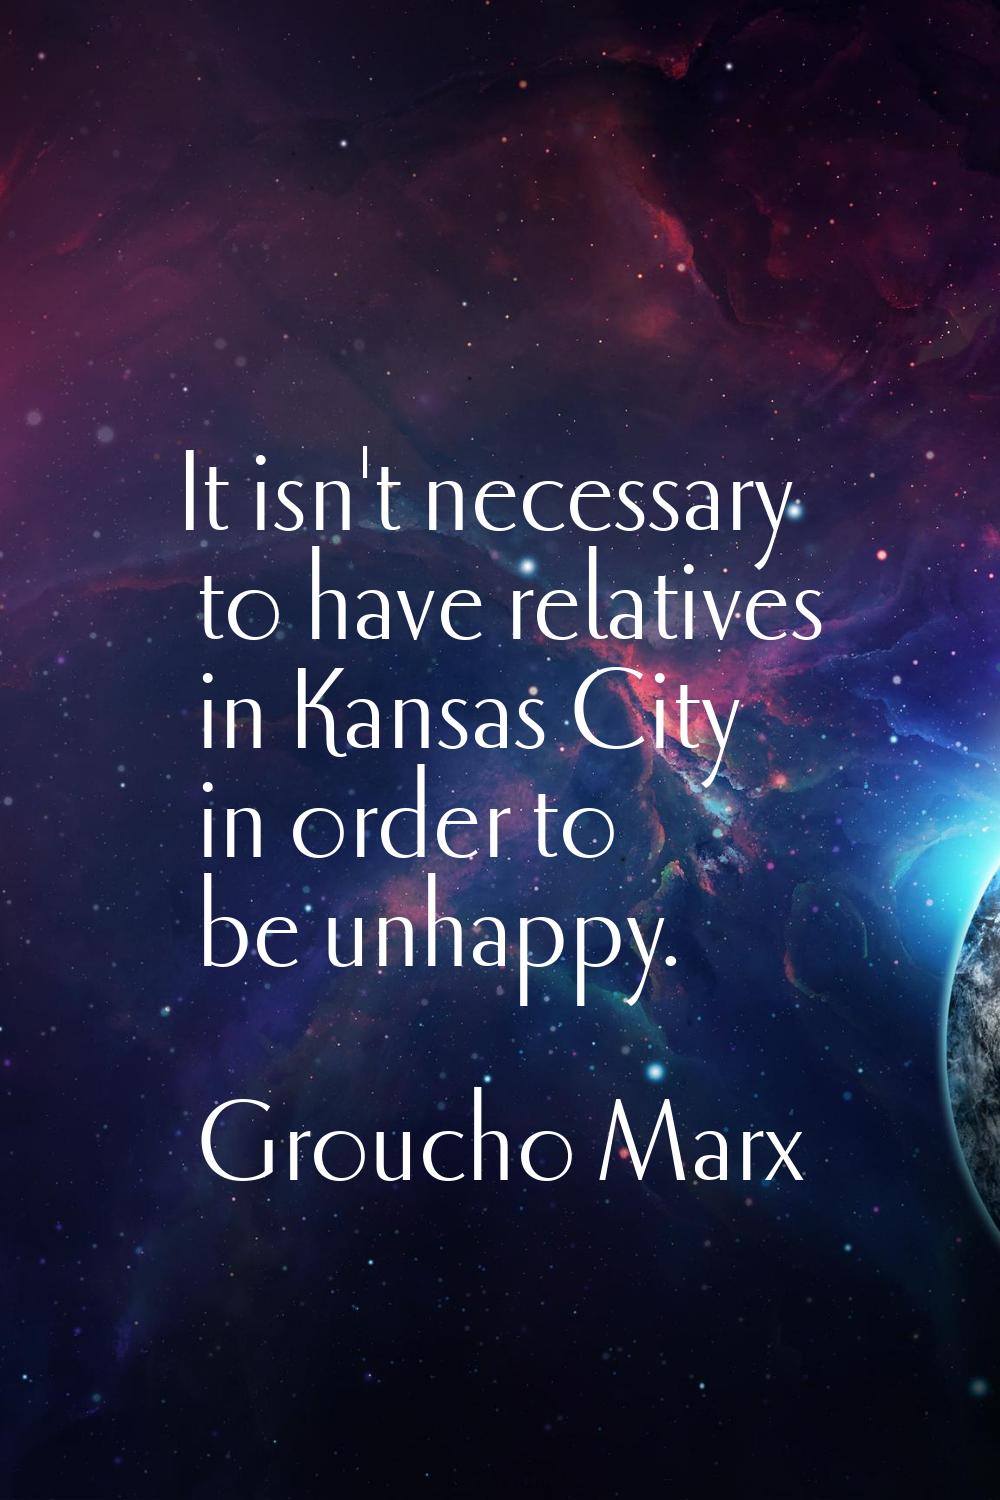 It isn't necessary to have relatives in Kansas City in order to be unhappy.